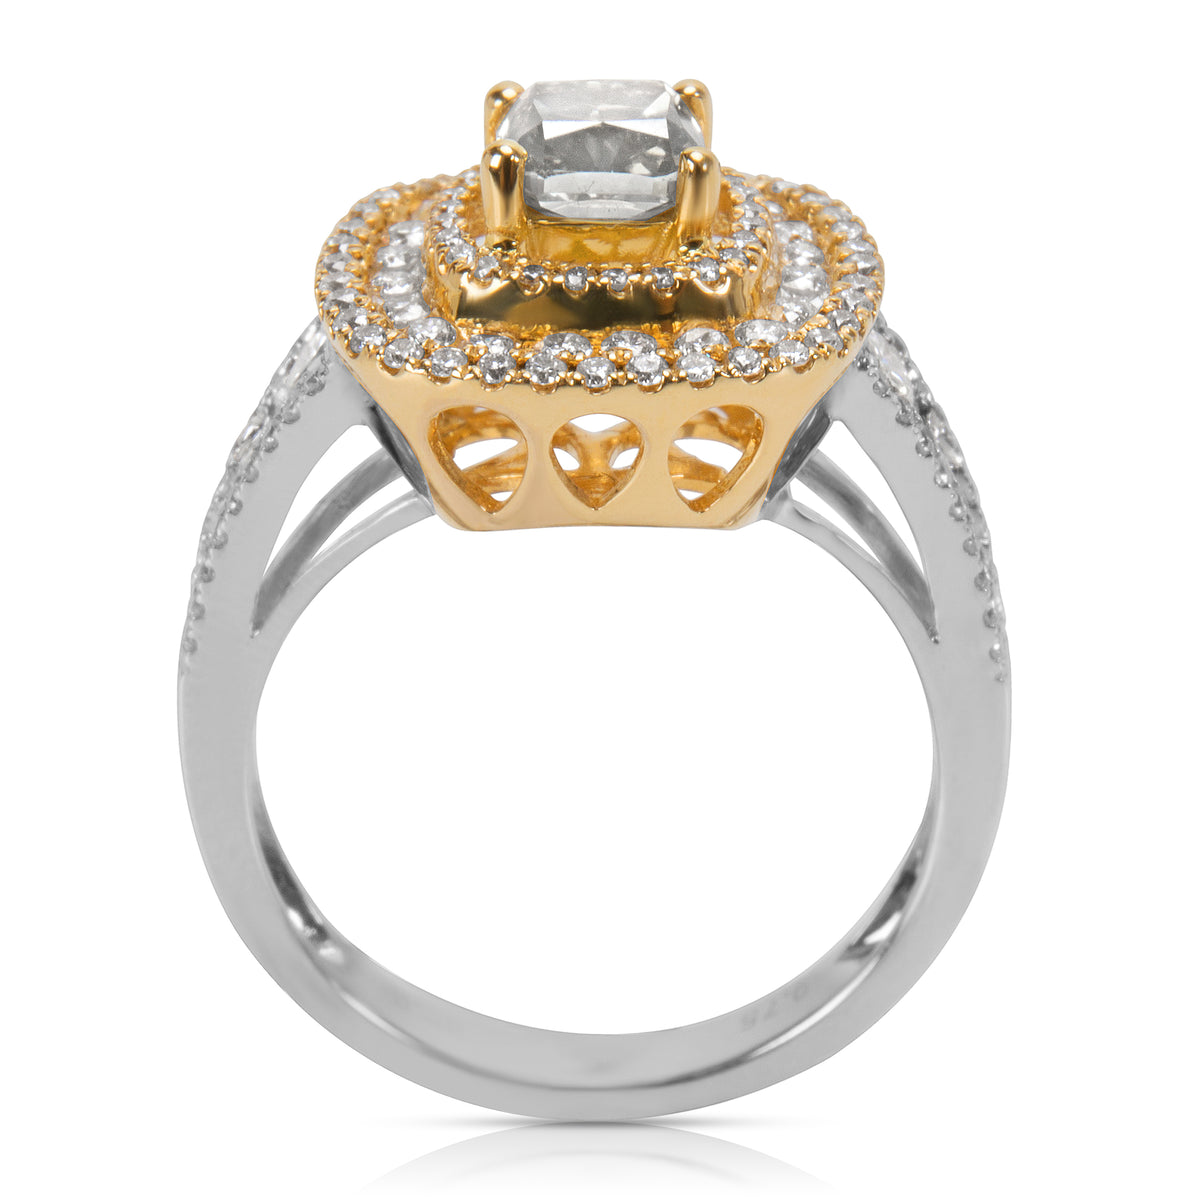 BRAND NEW Brown Diamond Engagement Ring in 18K 2 Tone Gold (1.81 CTW)